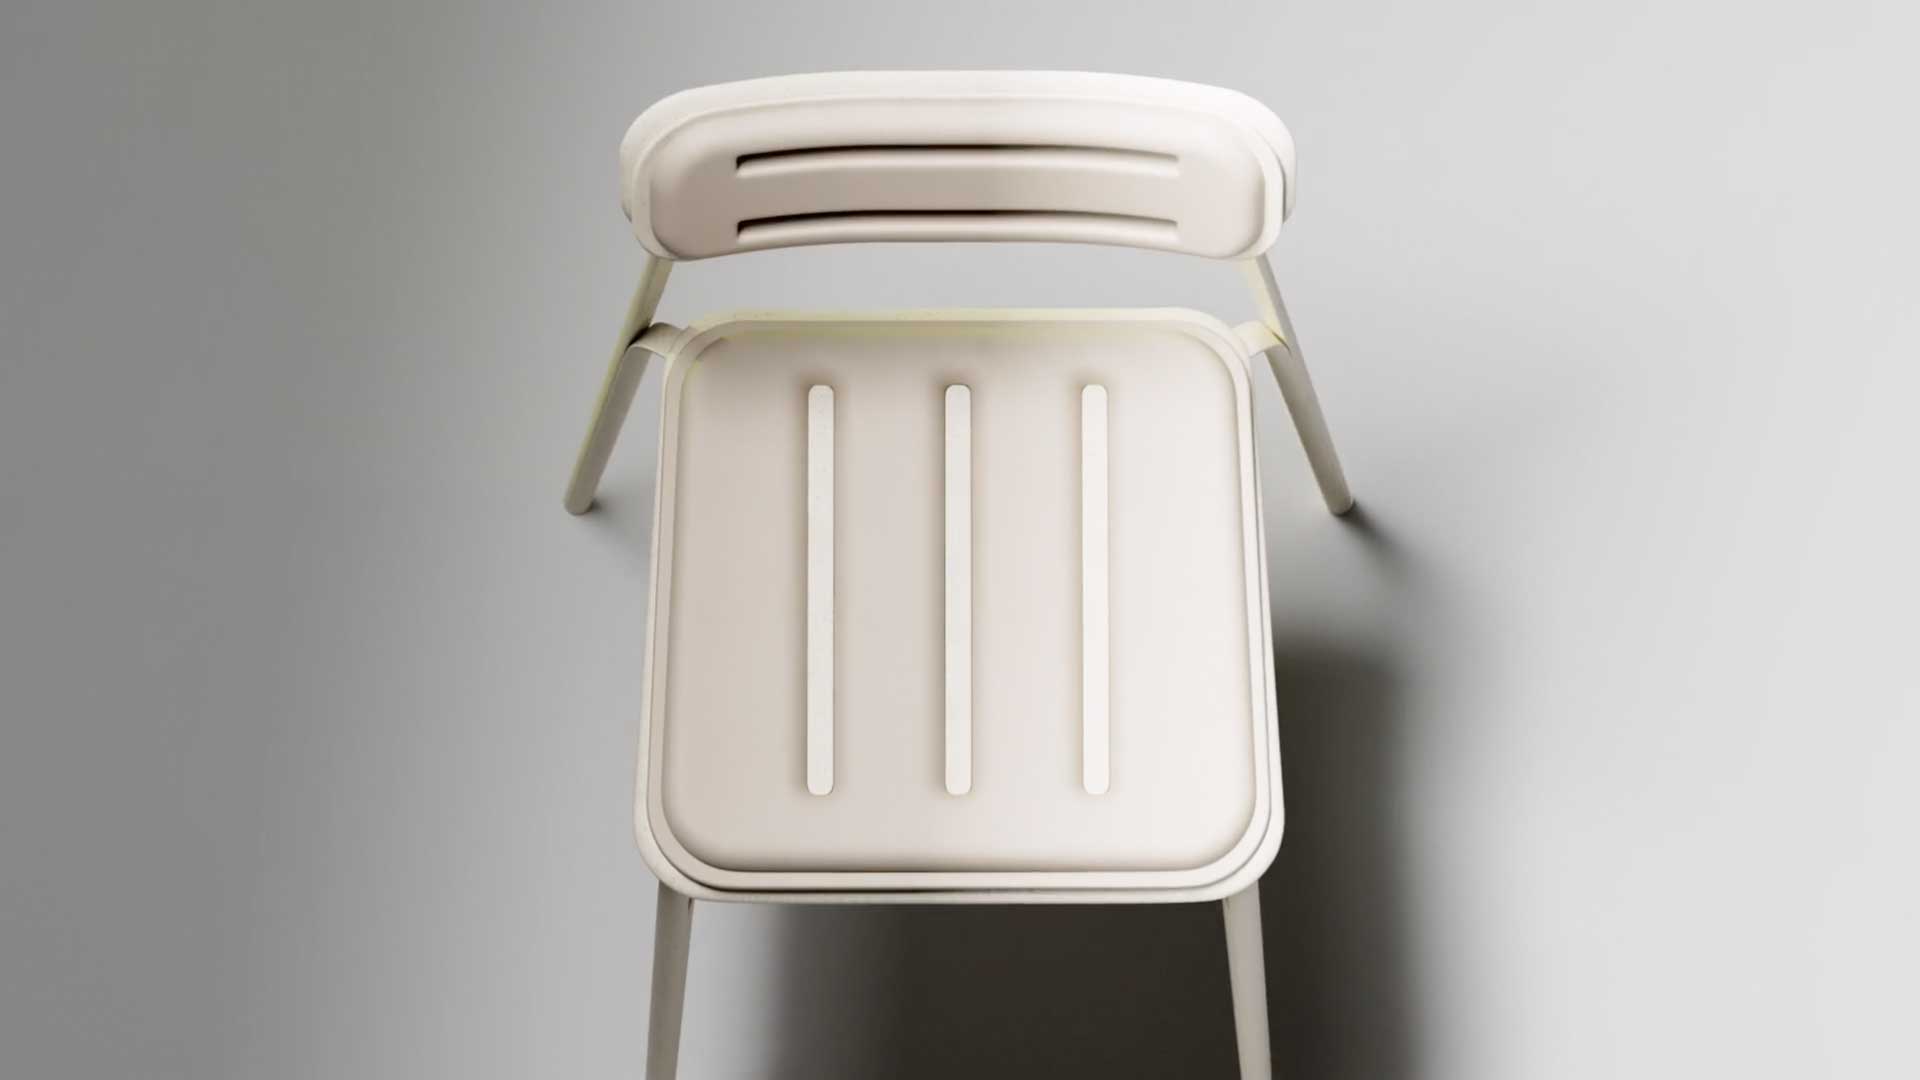 PROWL Peel Chair by Dada Projects | STASH MAGAZINE